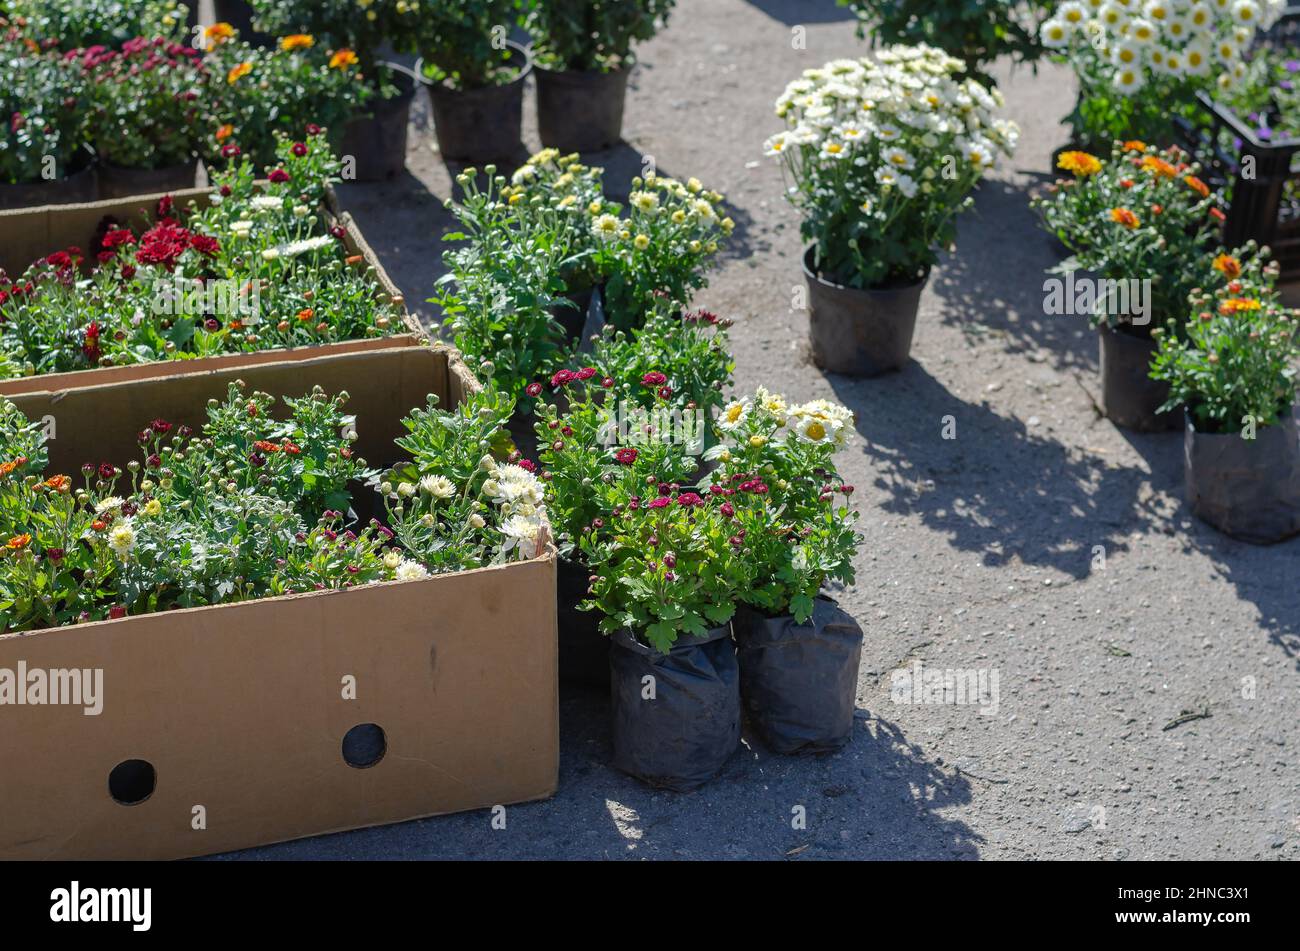 Farmer's Fair of gardening in the open air. Colorful chrysanthemums and daisies in flower pots. Bushes of different varieties of beautiful ornamental Stock Photo